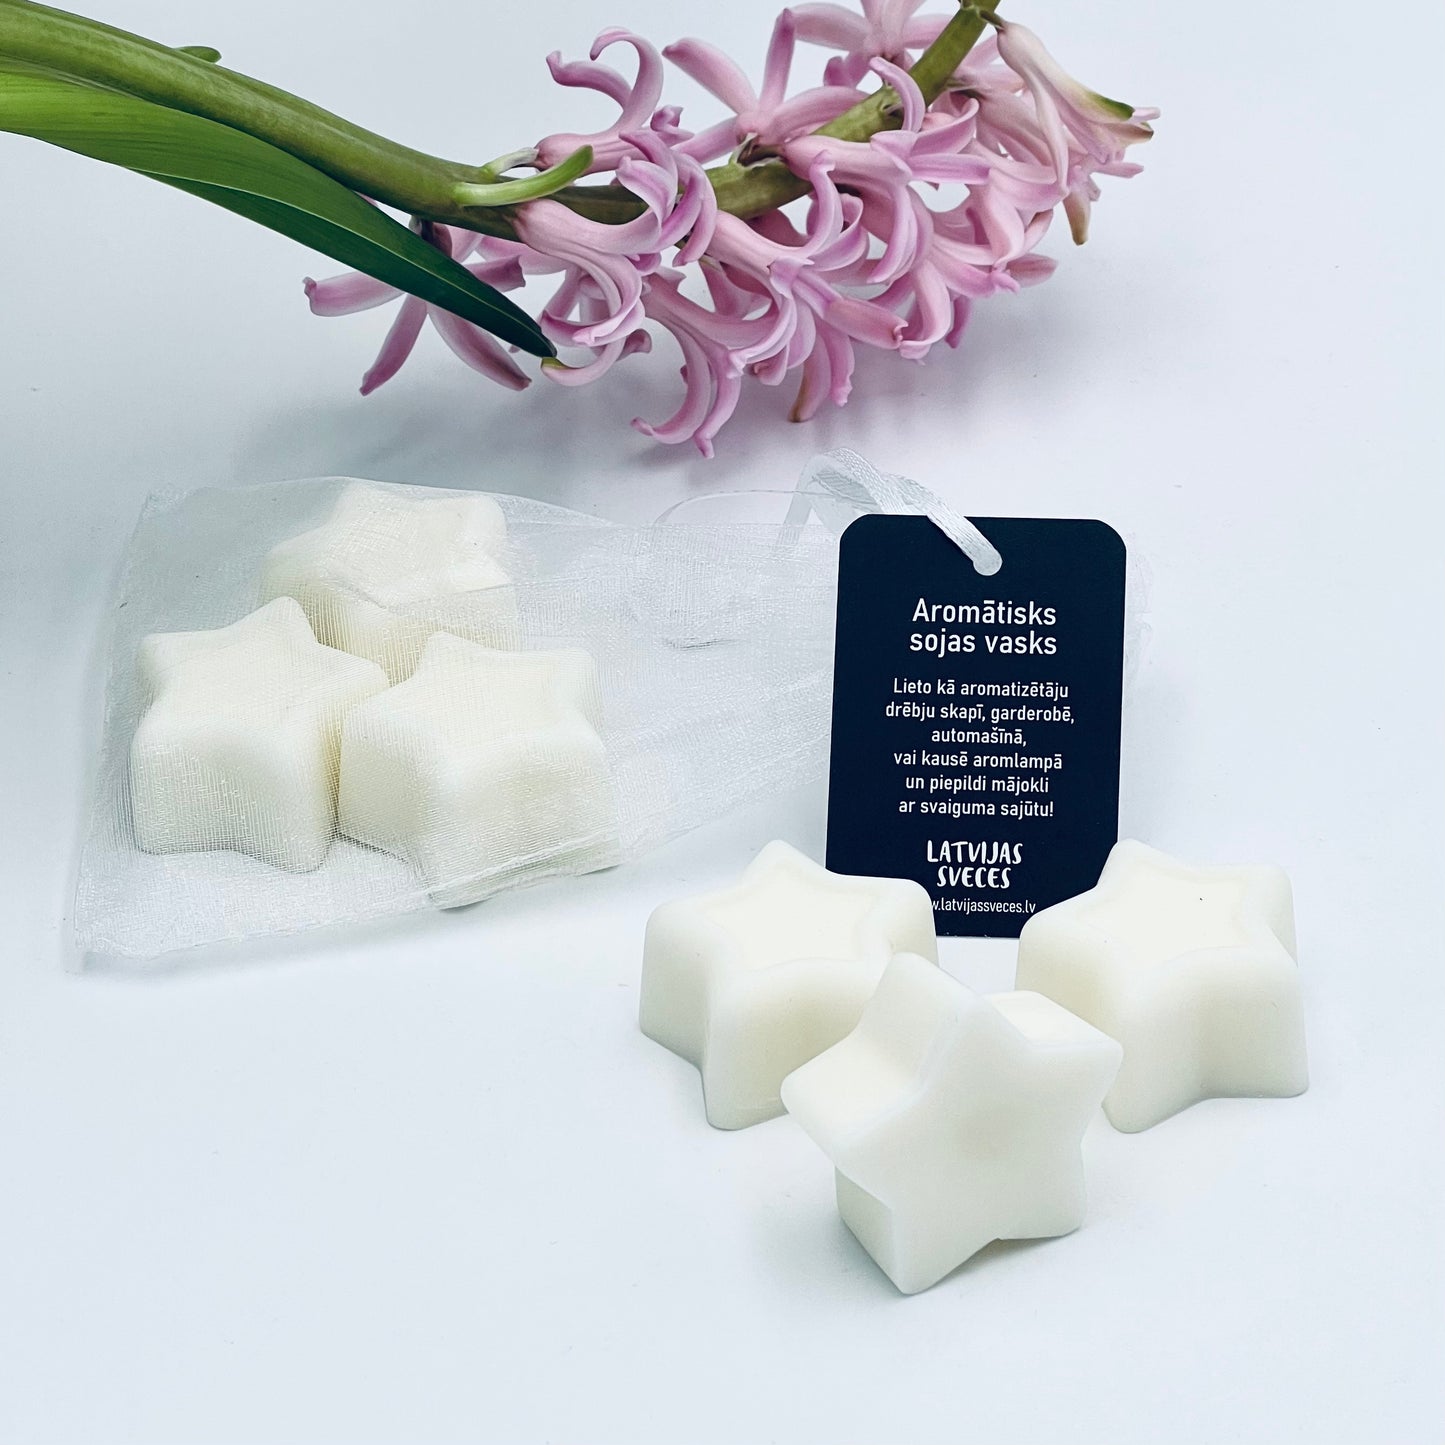 Scented soy wax "Stars" with lavender essential oils